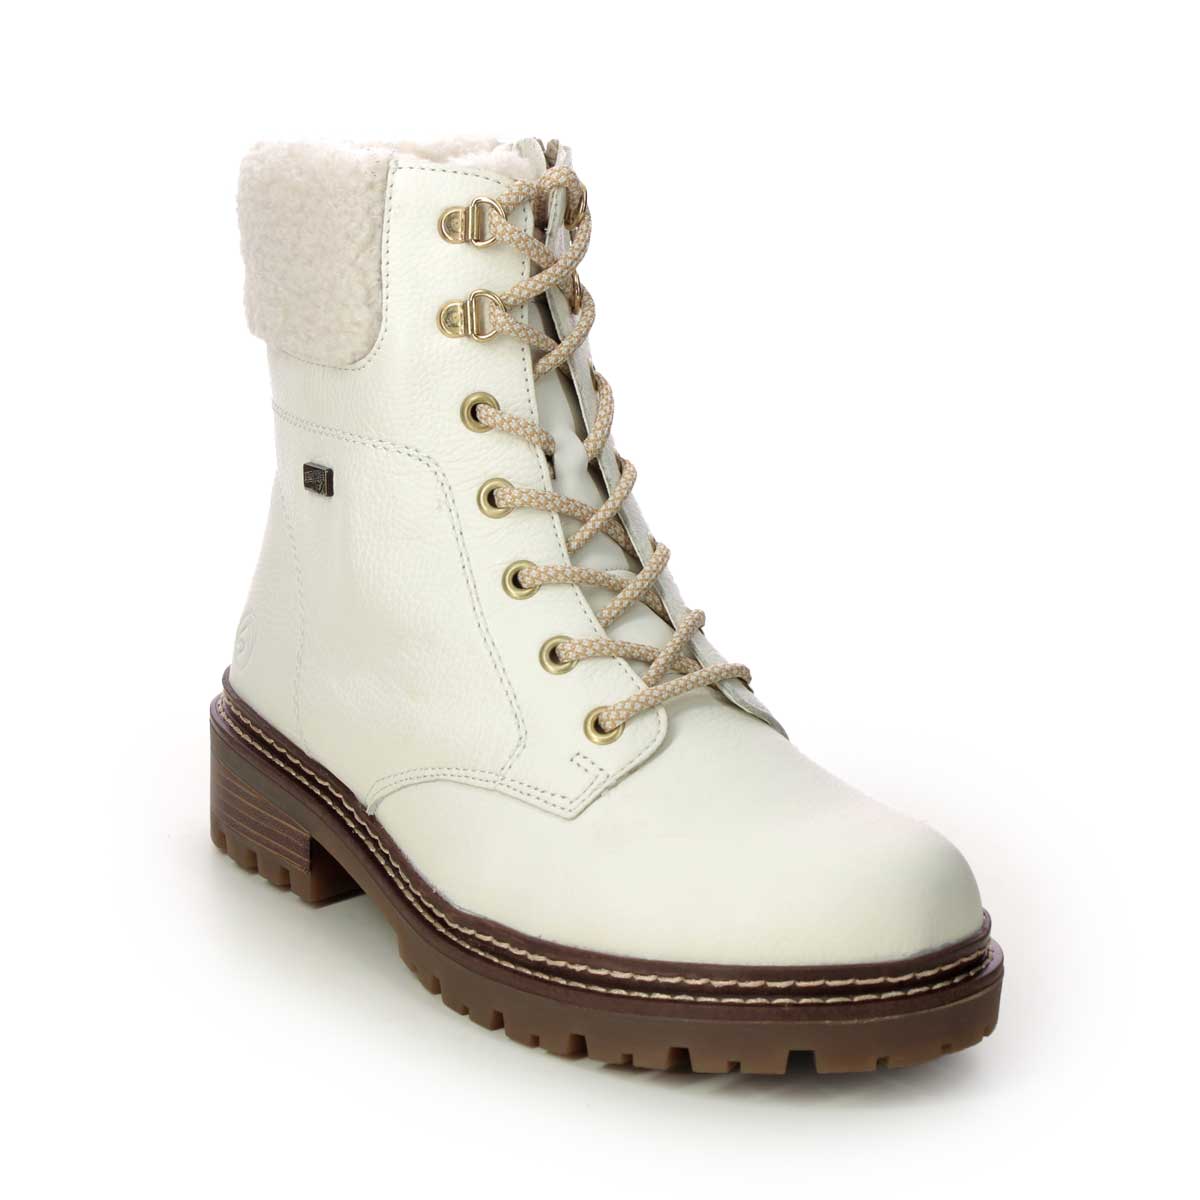 Remonte Astra Teddy Tex White Leather Womens Winter Boots D0B74-81 In Size 38 In Plain White Leather